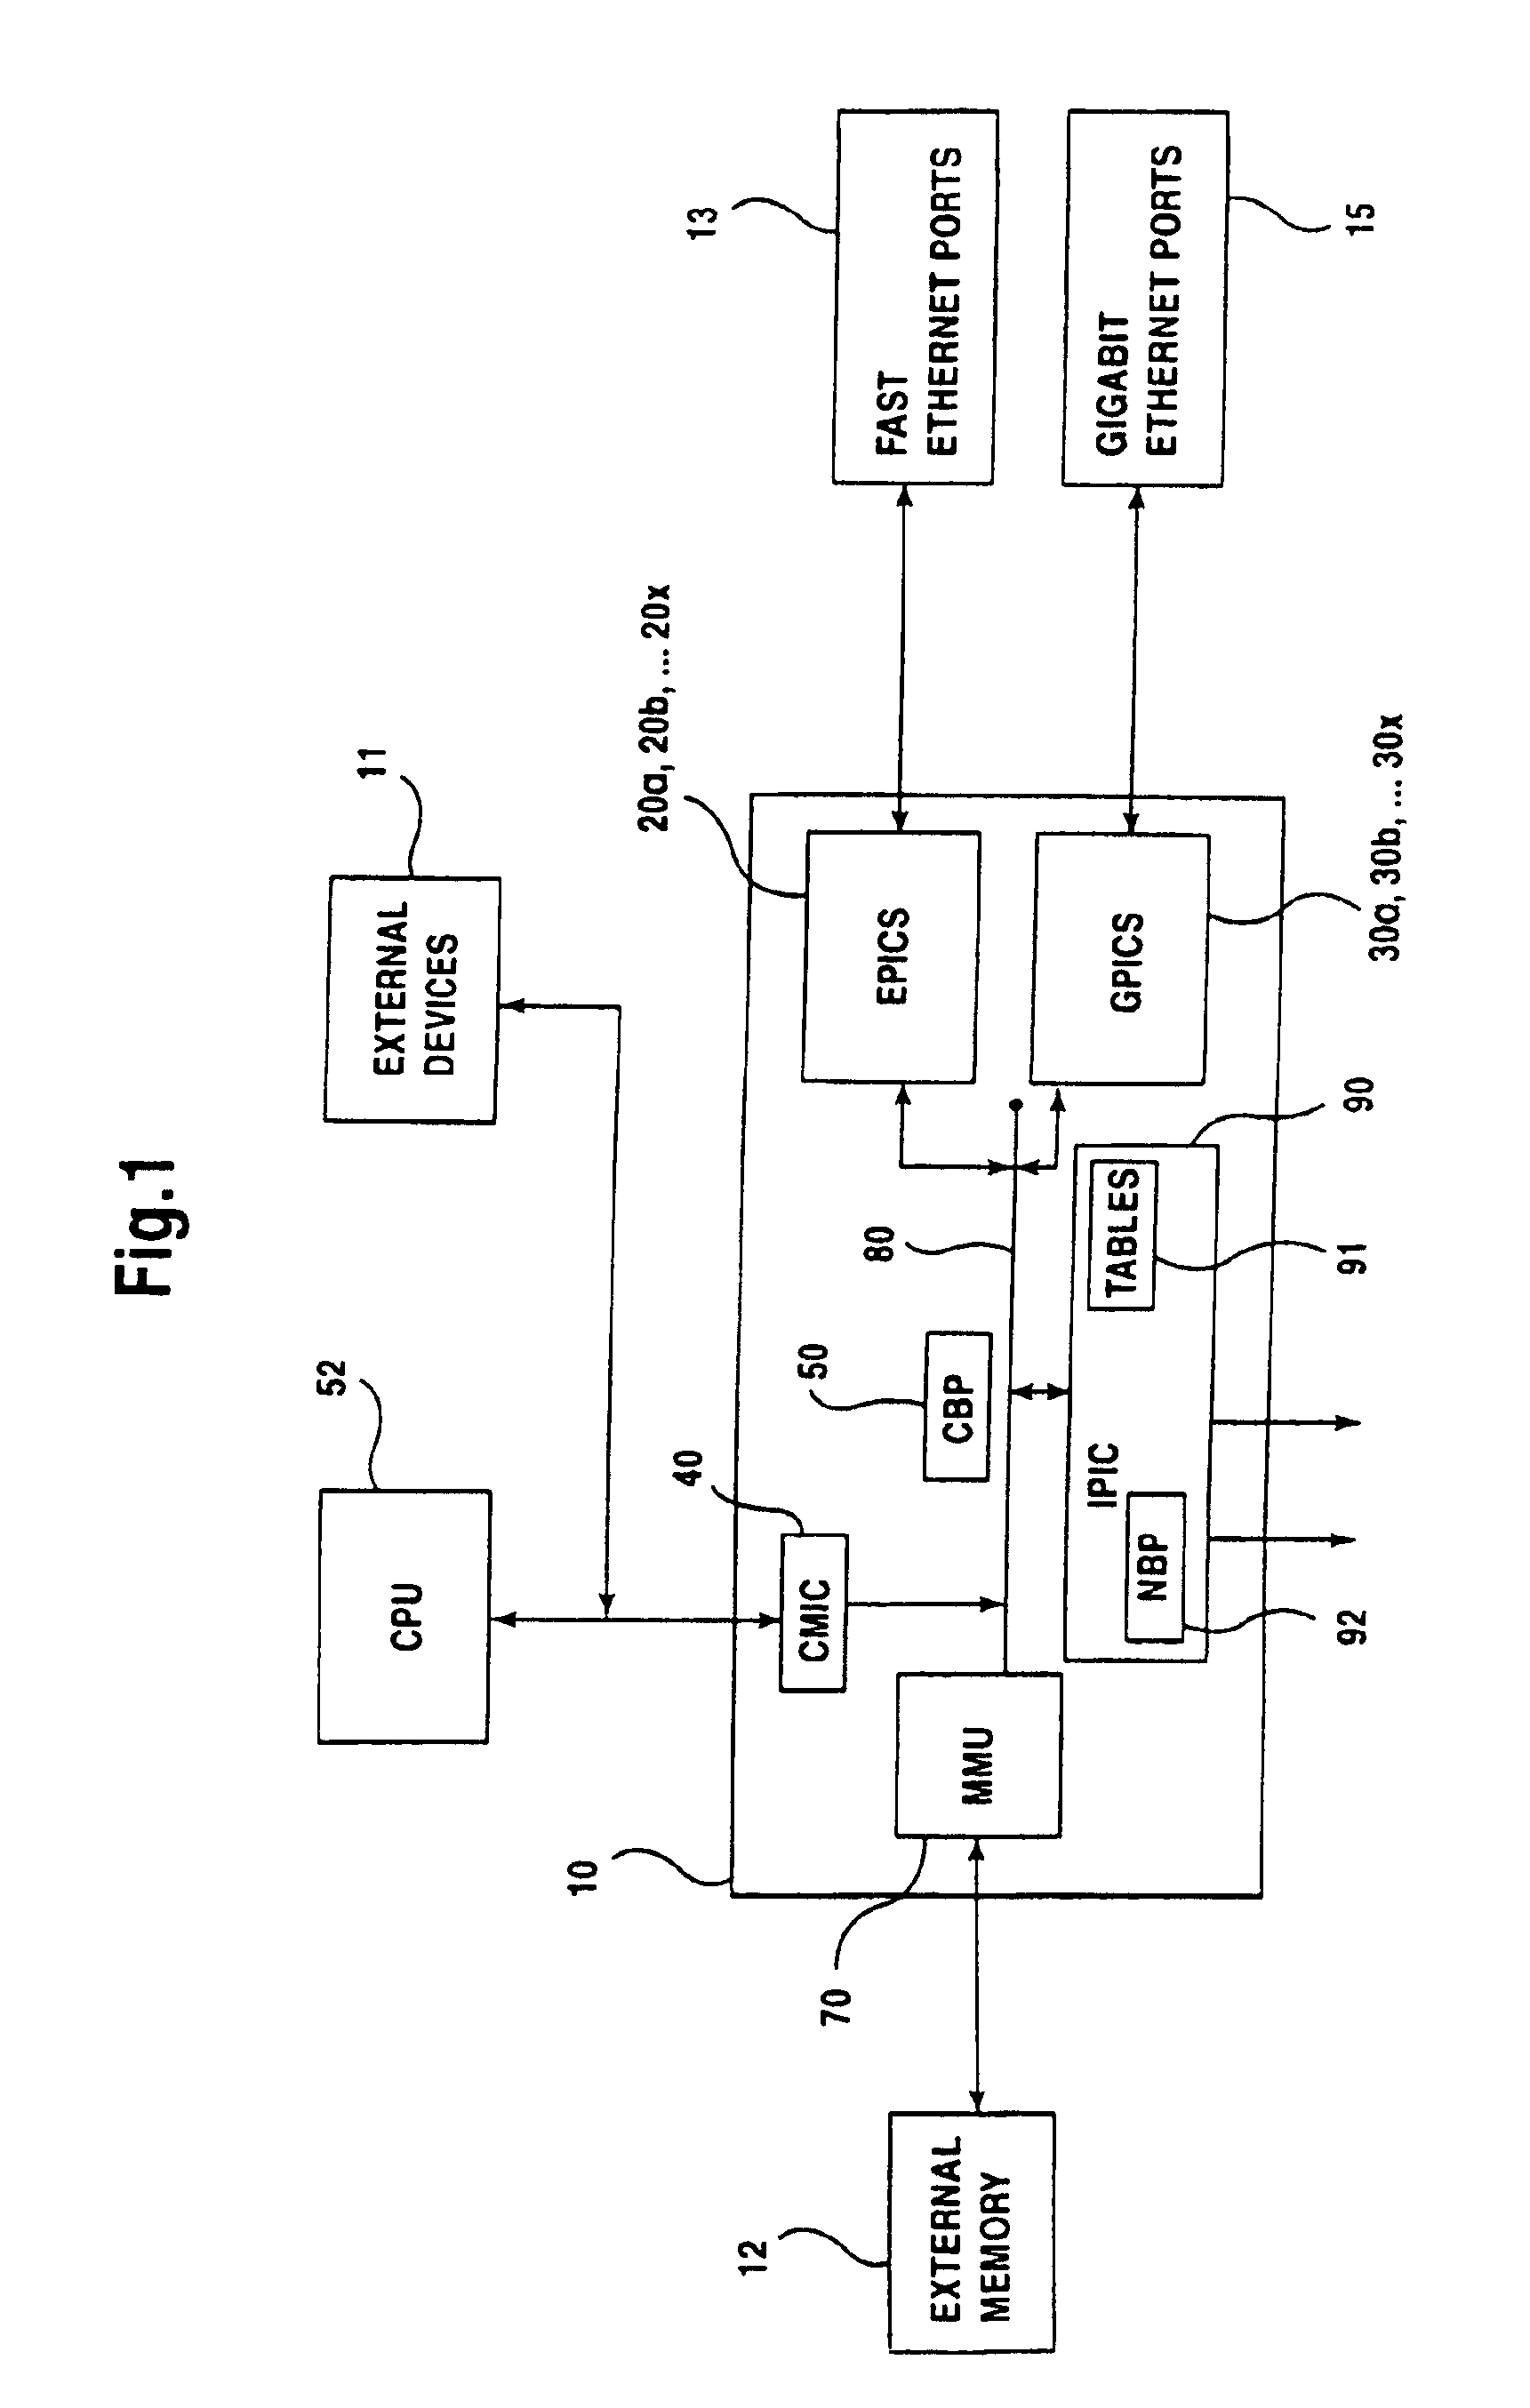 Apparatus and method for managing memory in a network switch